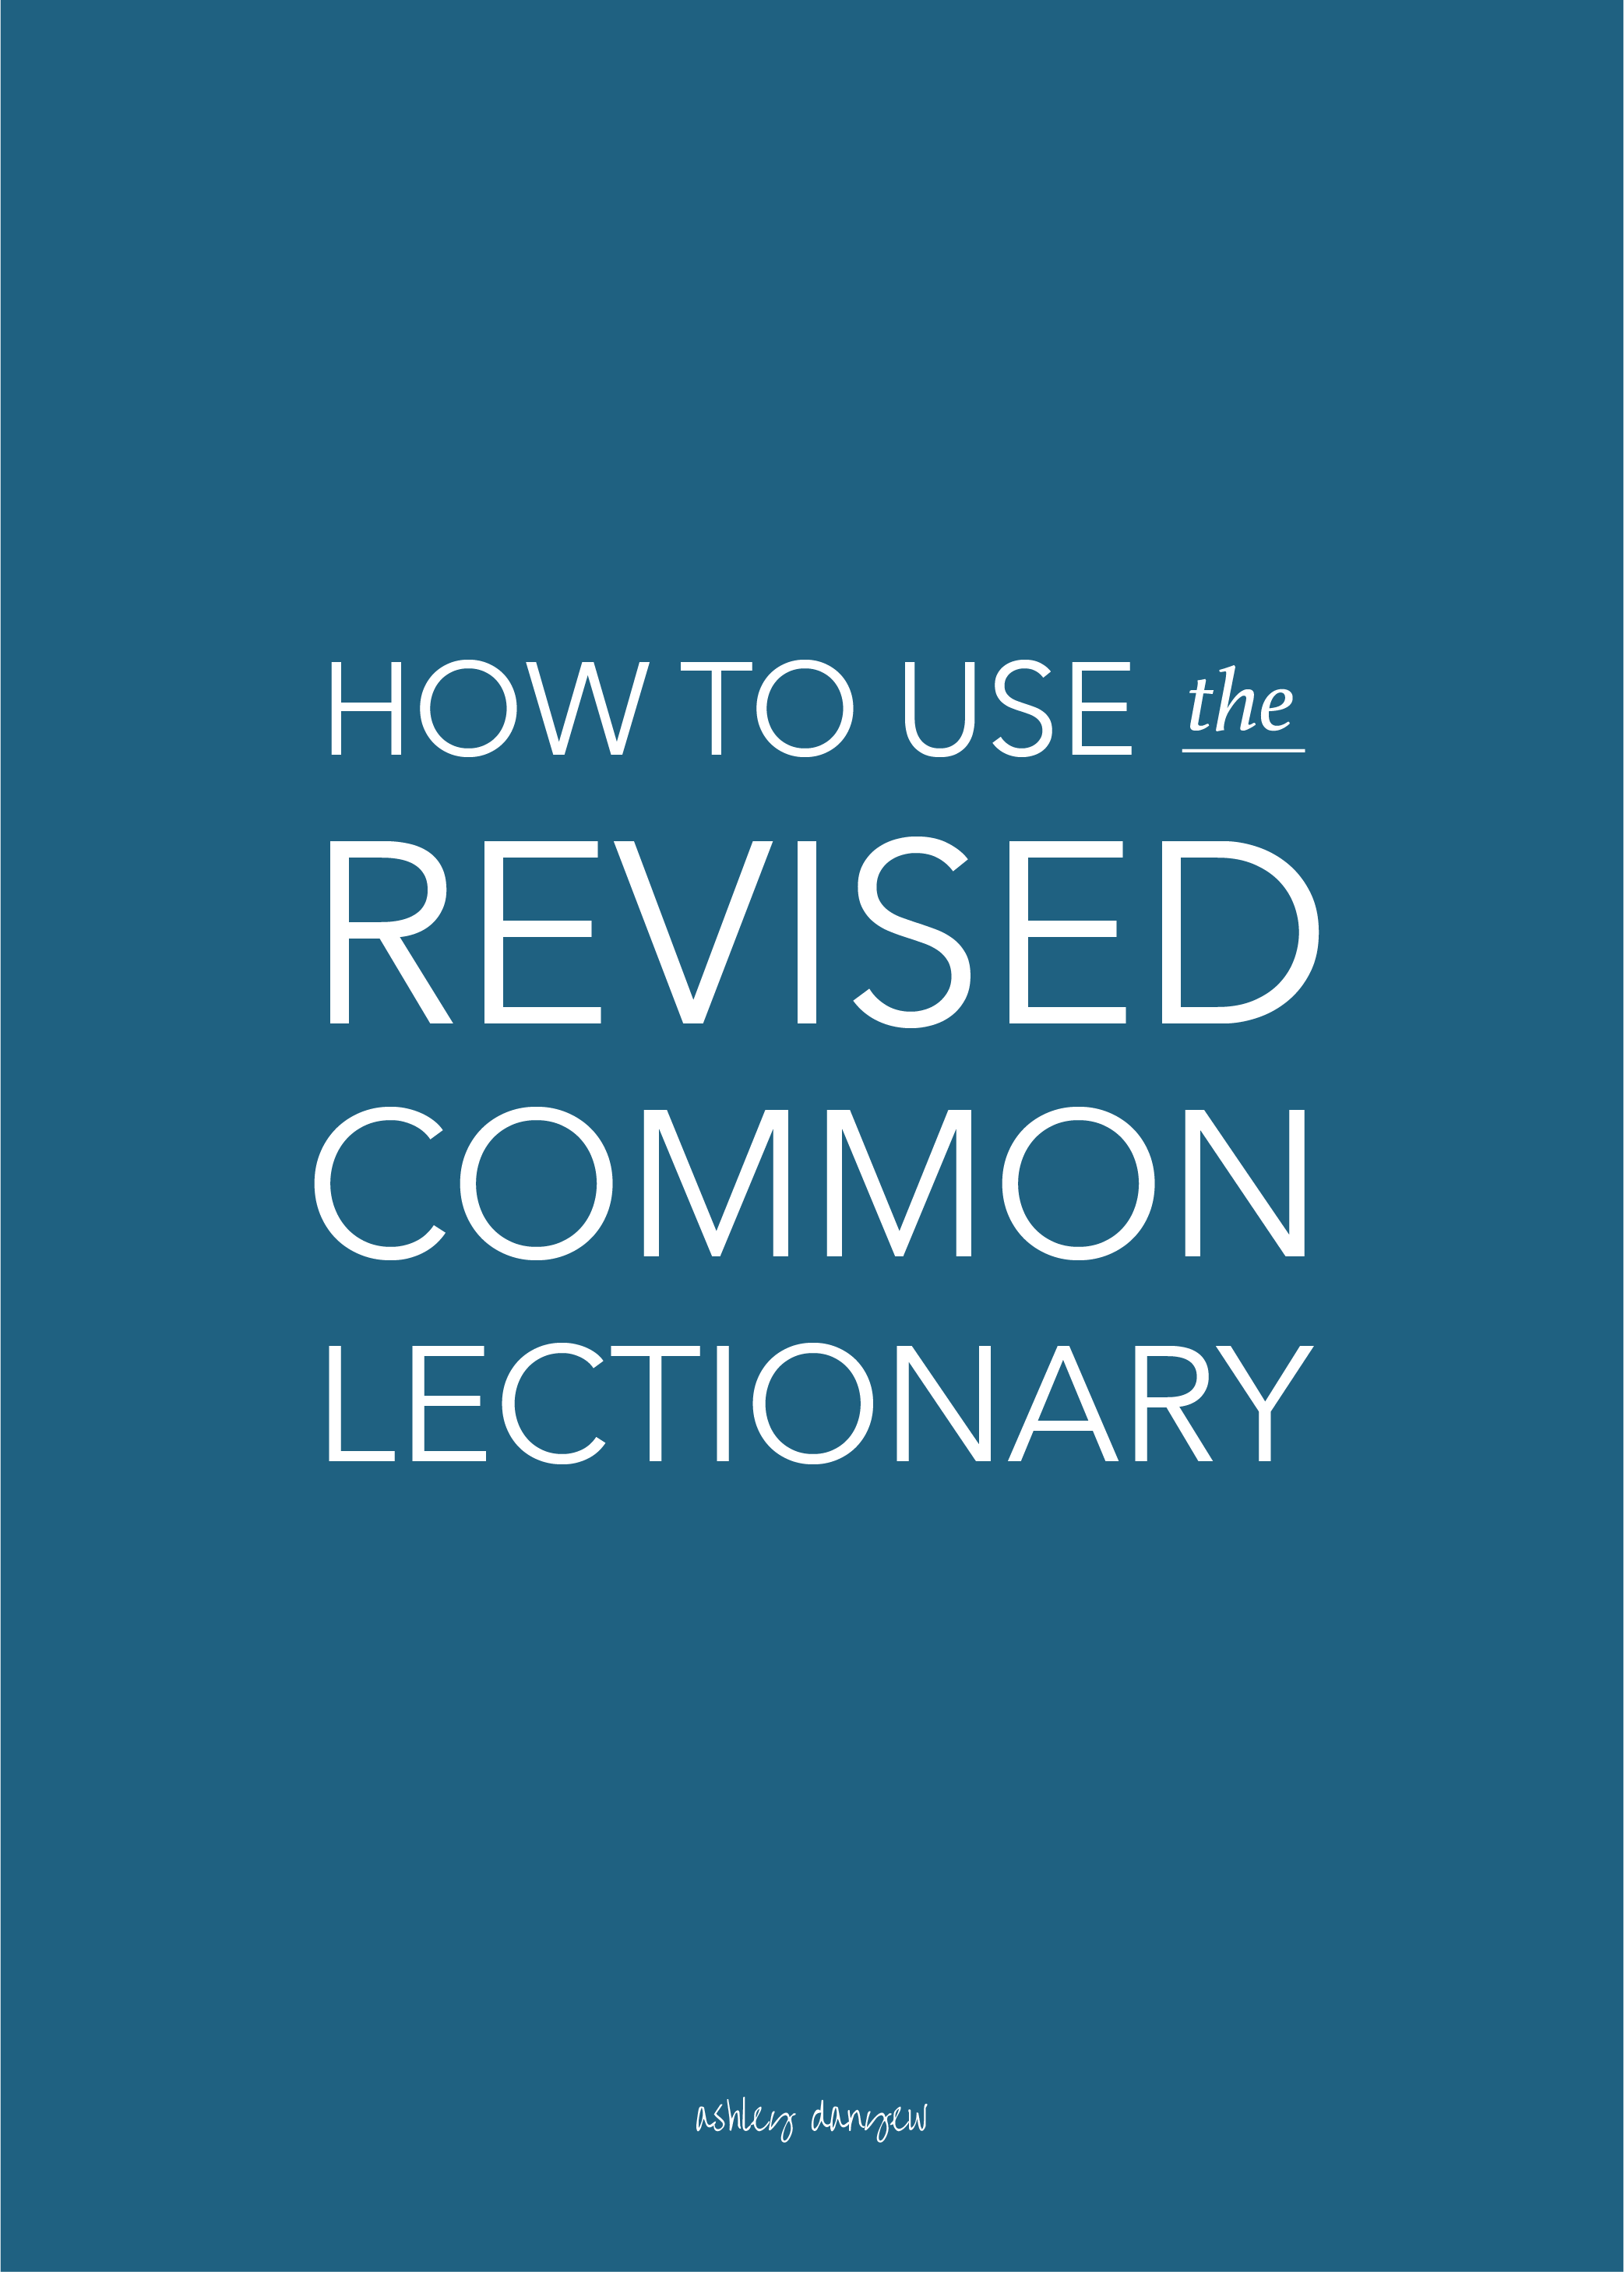 How to Use the Revised Common Lectionary Ashley Danyew